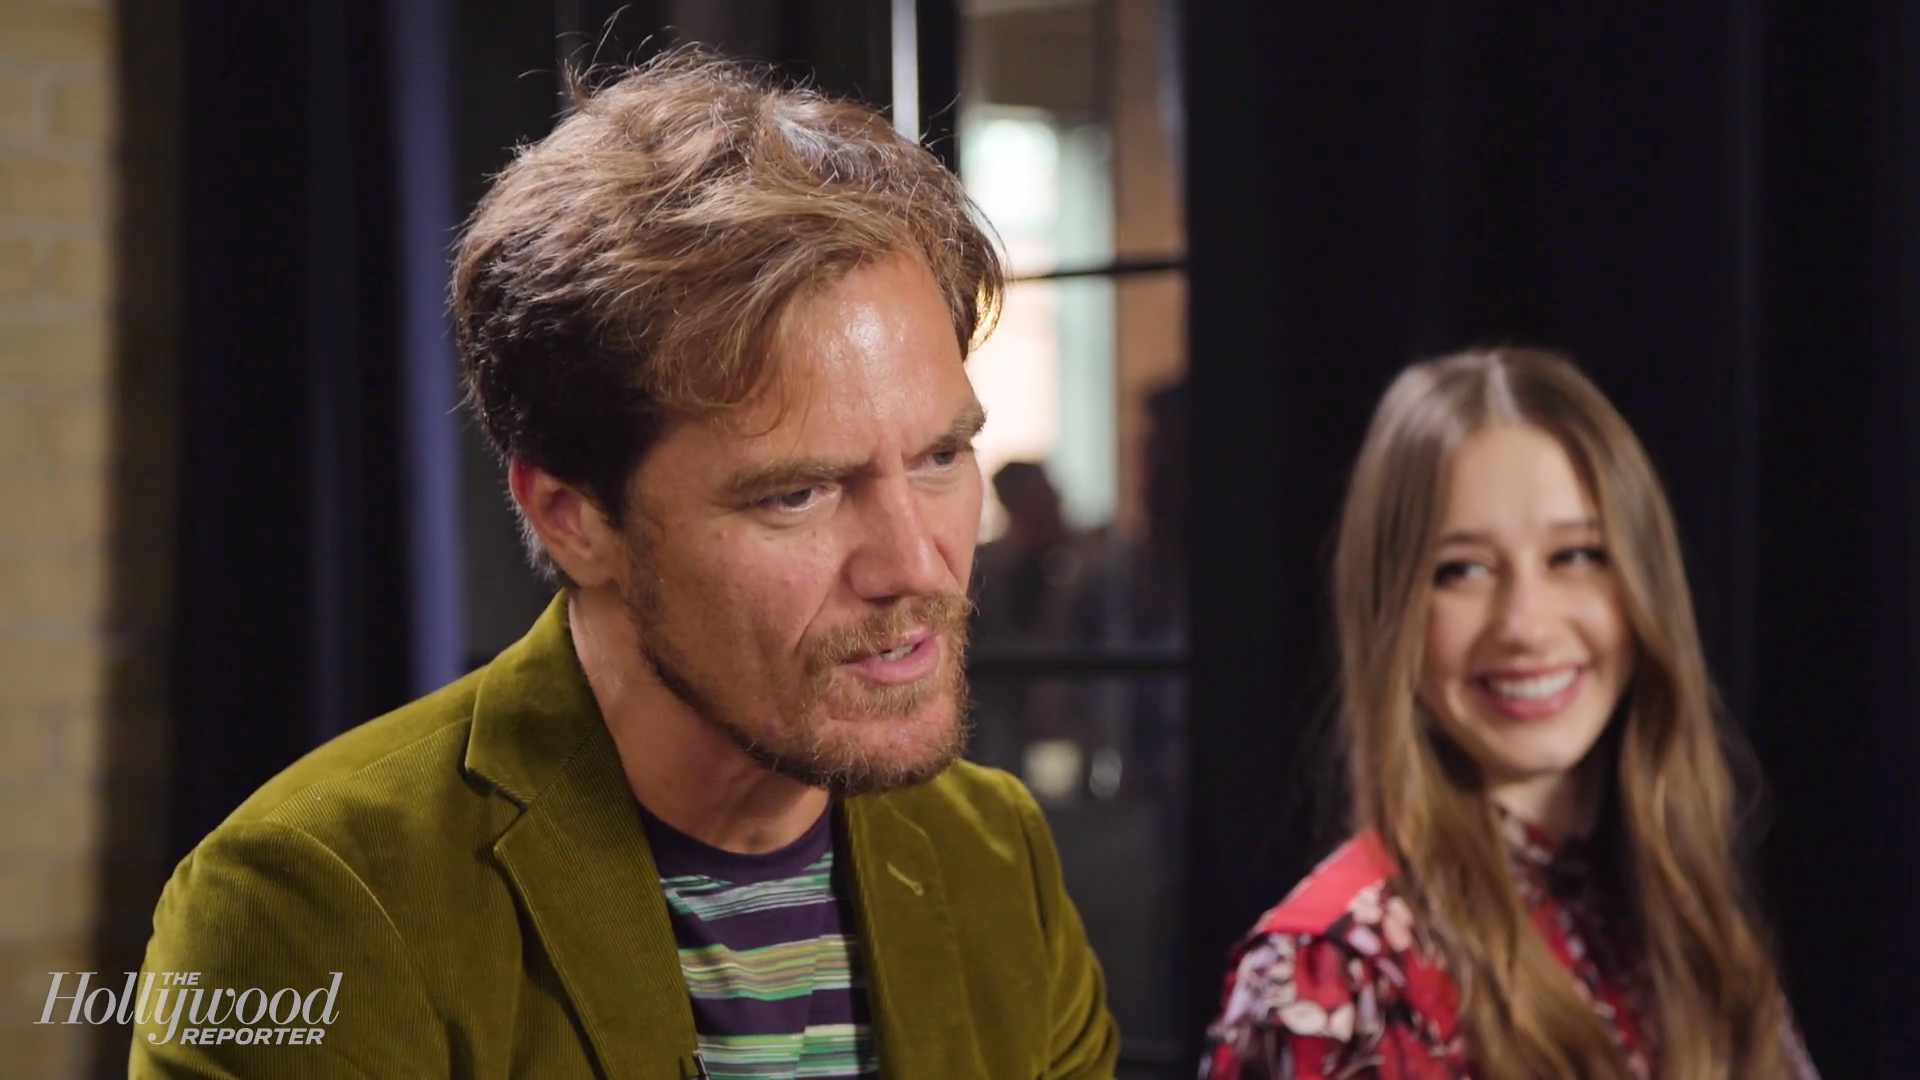 Michael Shannon's Taco Bell Past, James Bond Rumors and More Best Moments from TIFF 2018